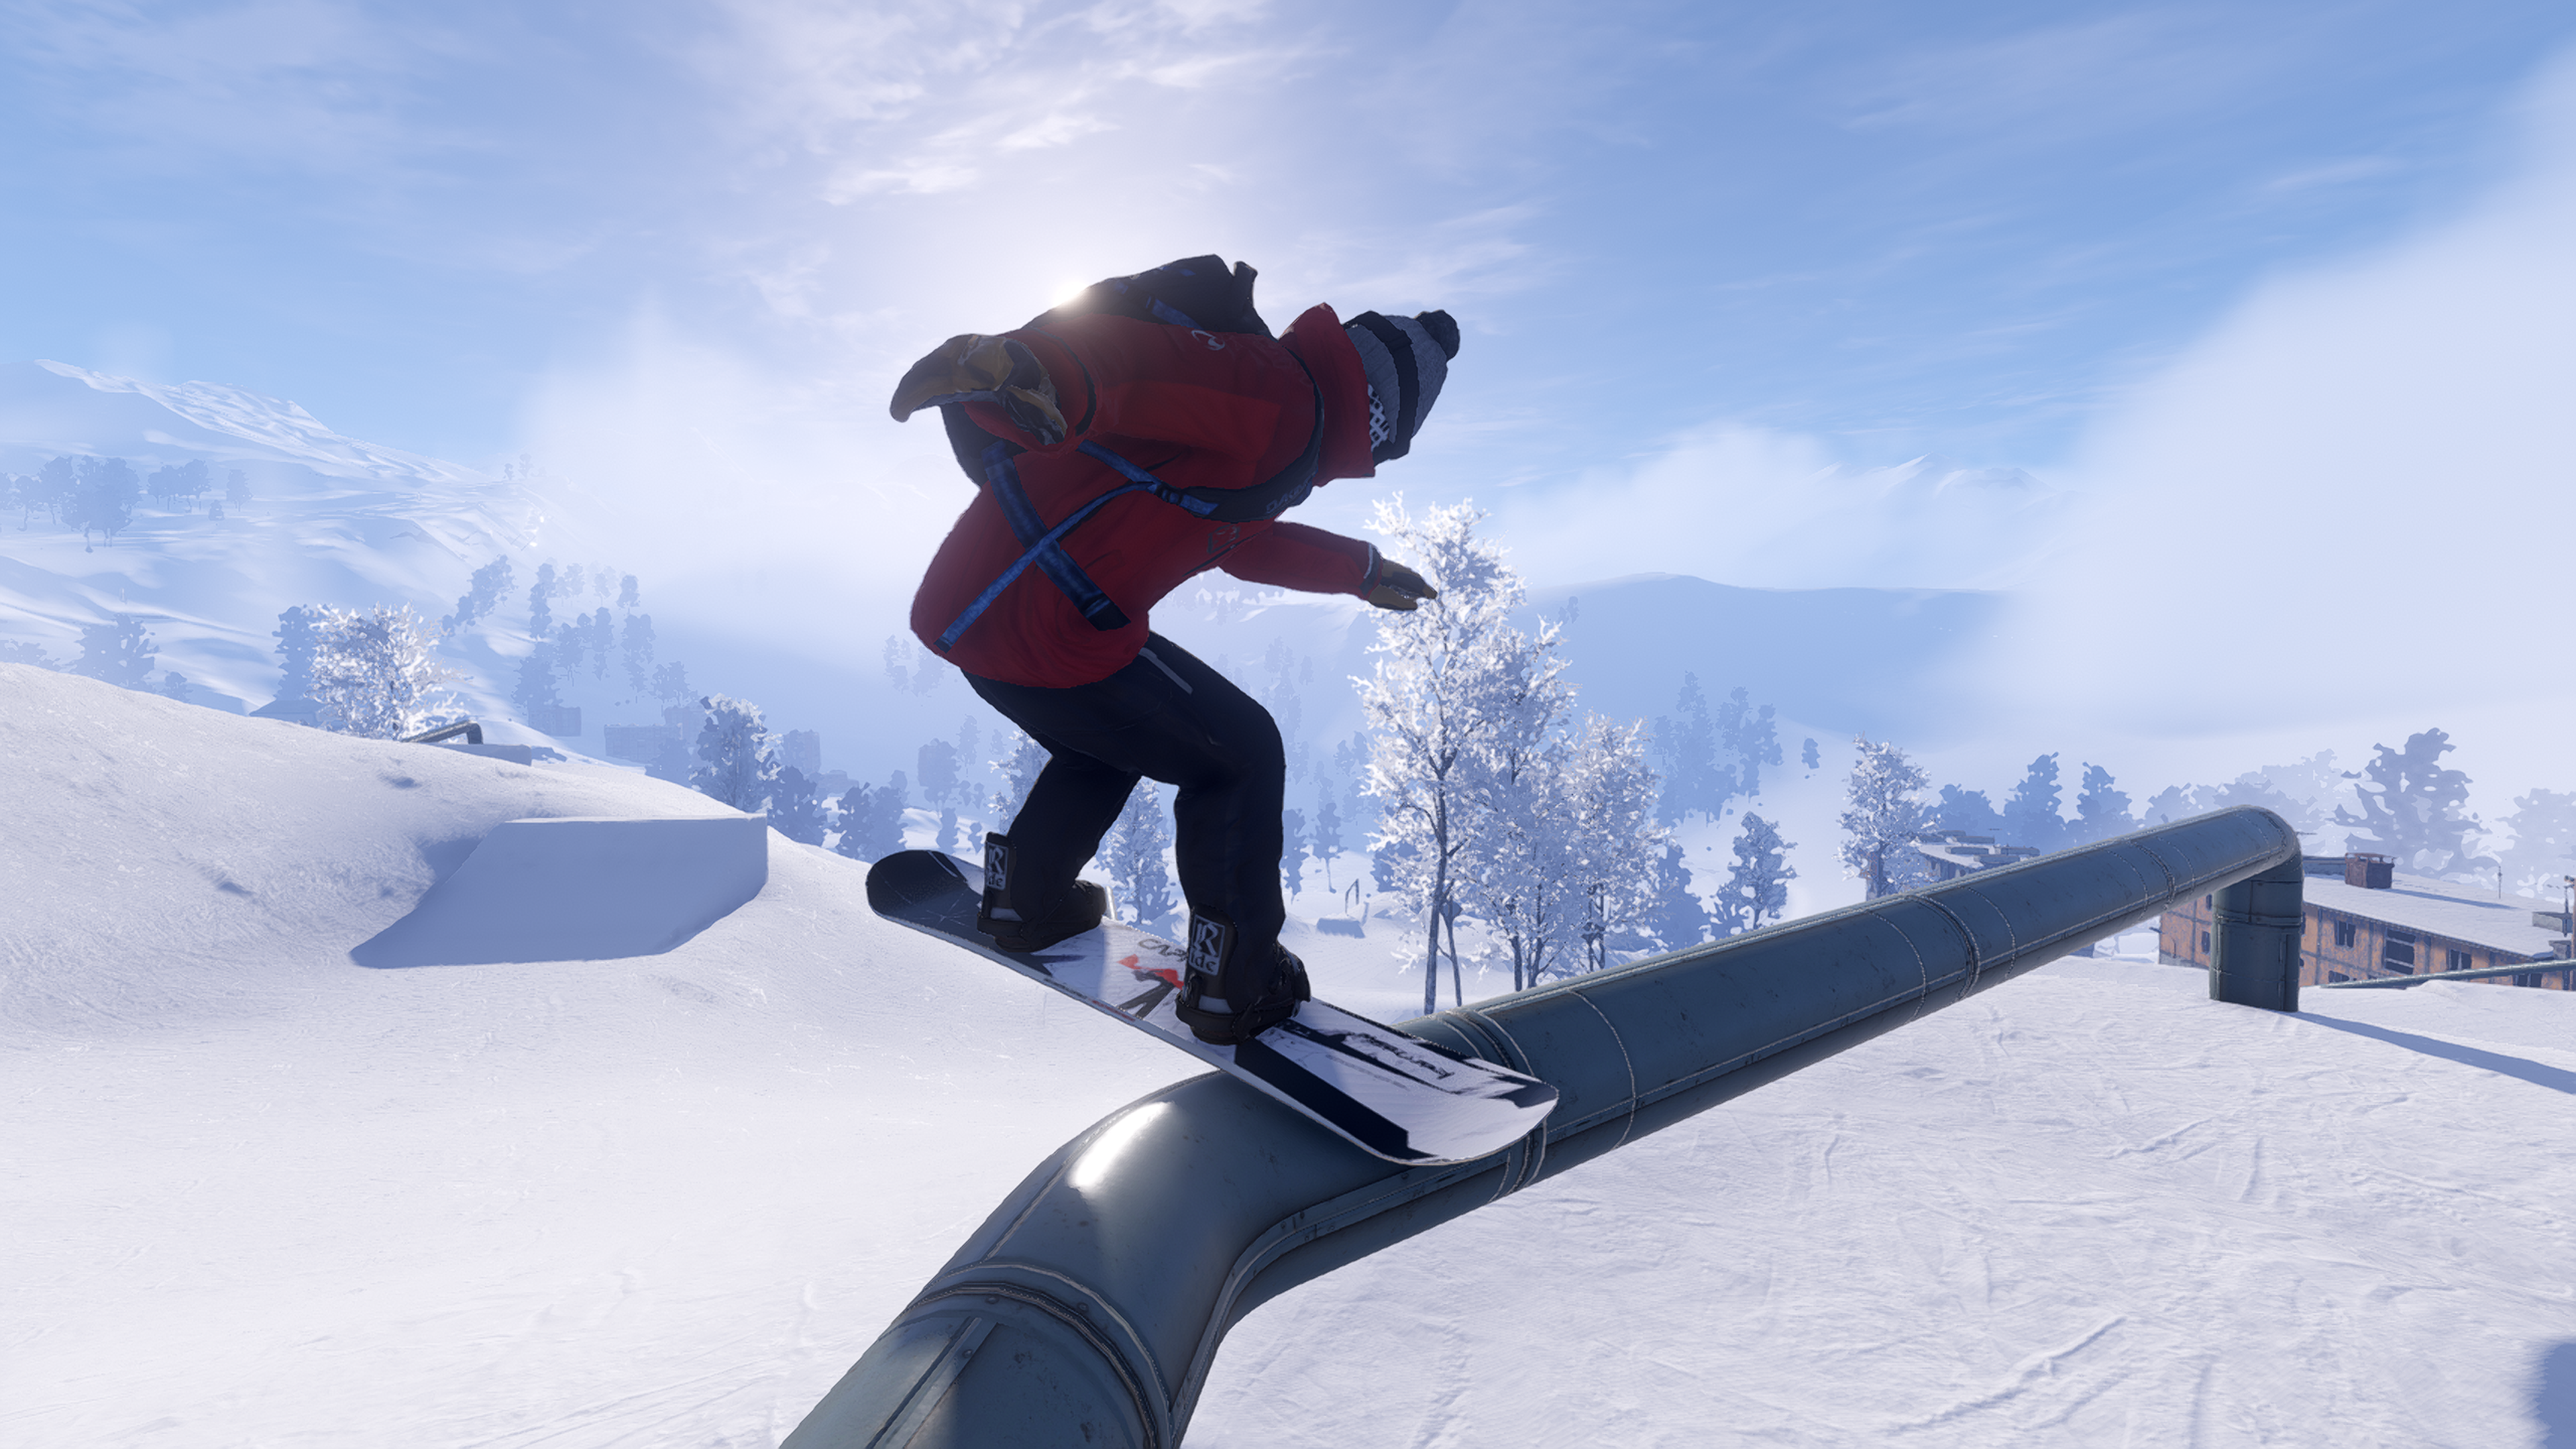 a closeup from behind a snowboarder as they grind on a metal pipe. The snowboarder is wearing a red jacket, black trousers and a grey bobble hat. The board they are riding on is whit with a black and red pattern on it. The mid-ground in front of the snowboarder features snow covered trees and buildings. The sun peers over the top of the snowboarders black backpack that they are carrying on their back